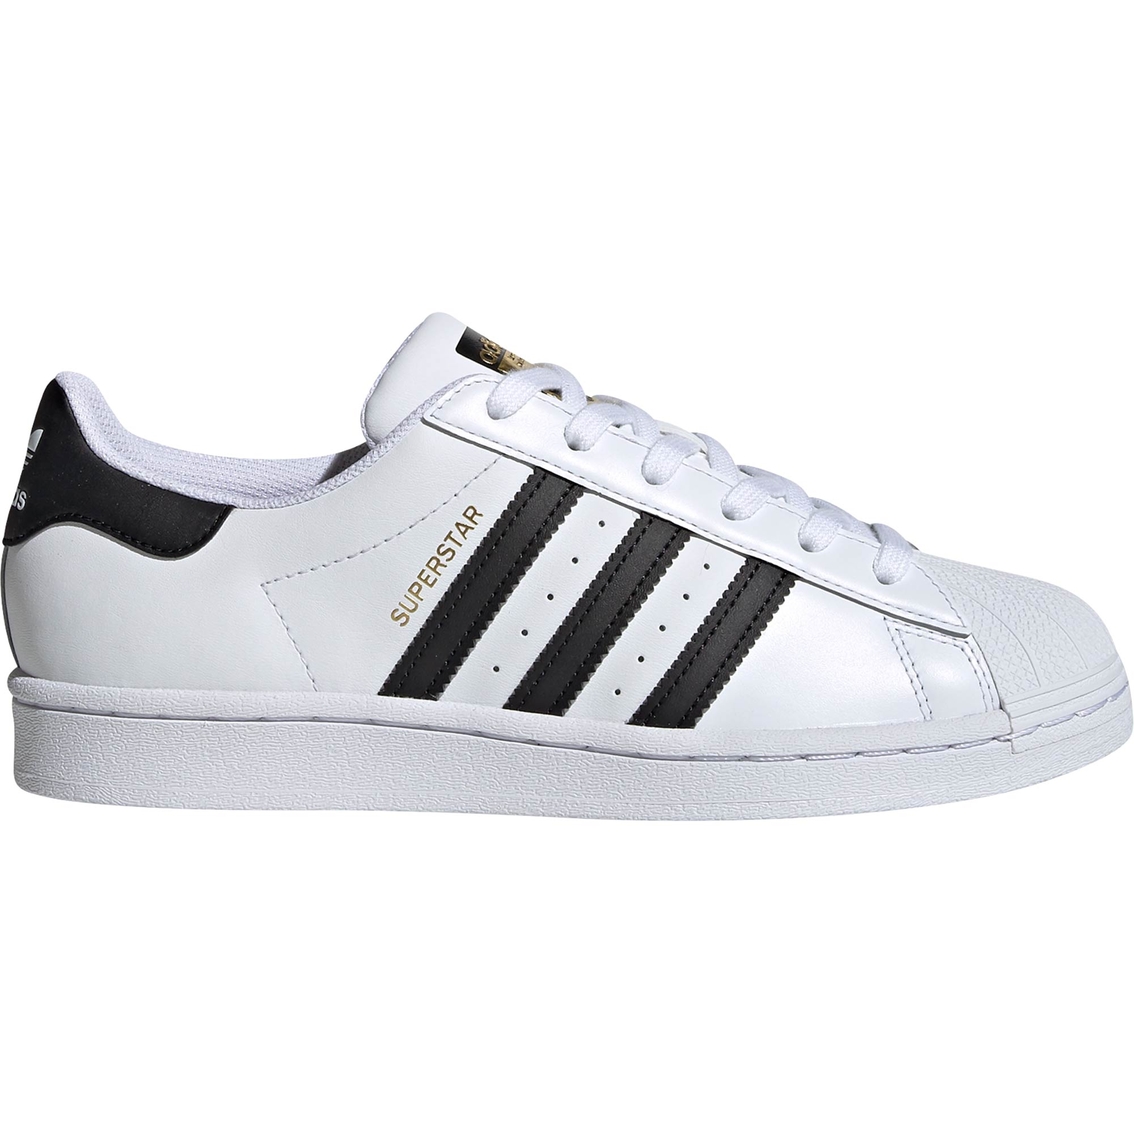 Adidas Women's Superstar Shoes - Image 2 of 5